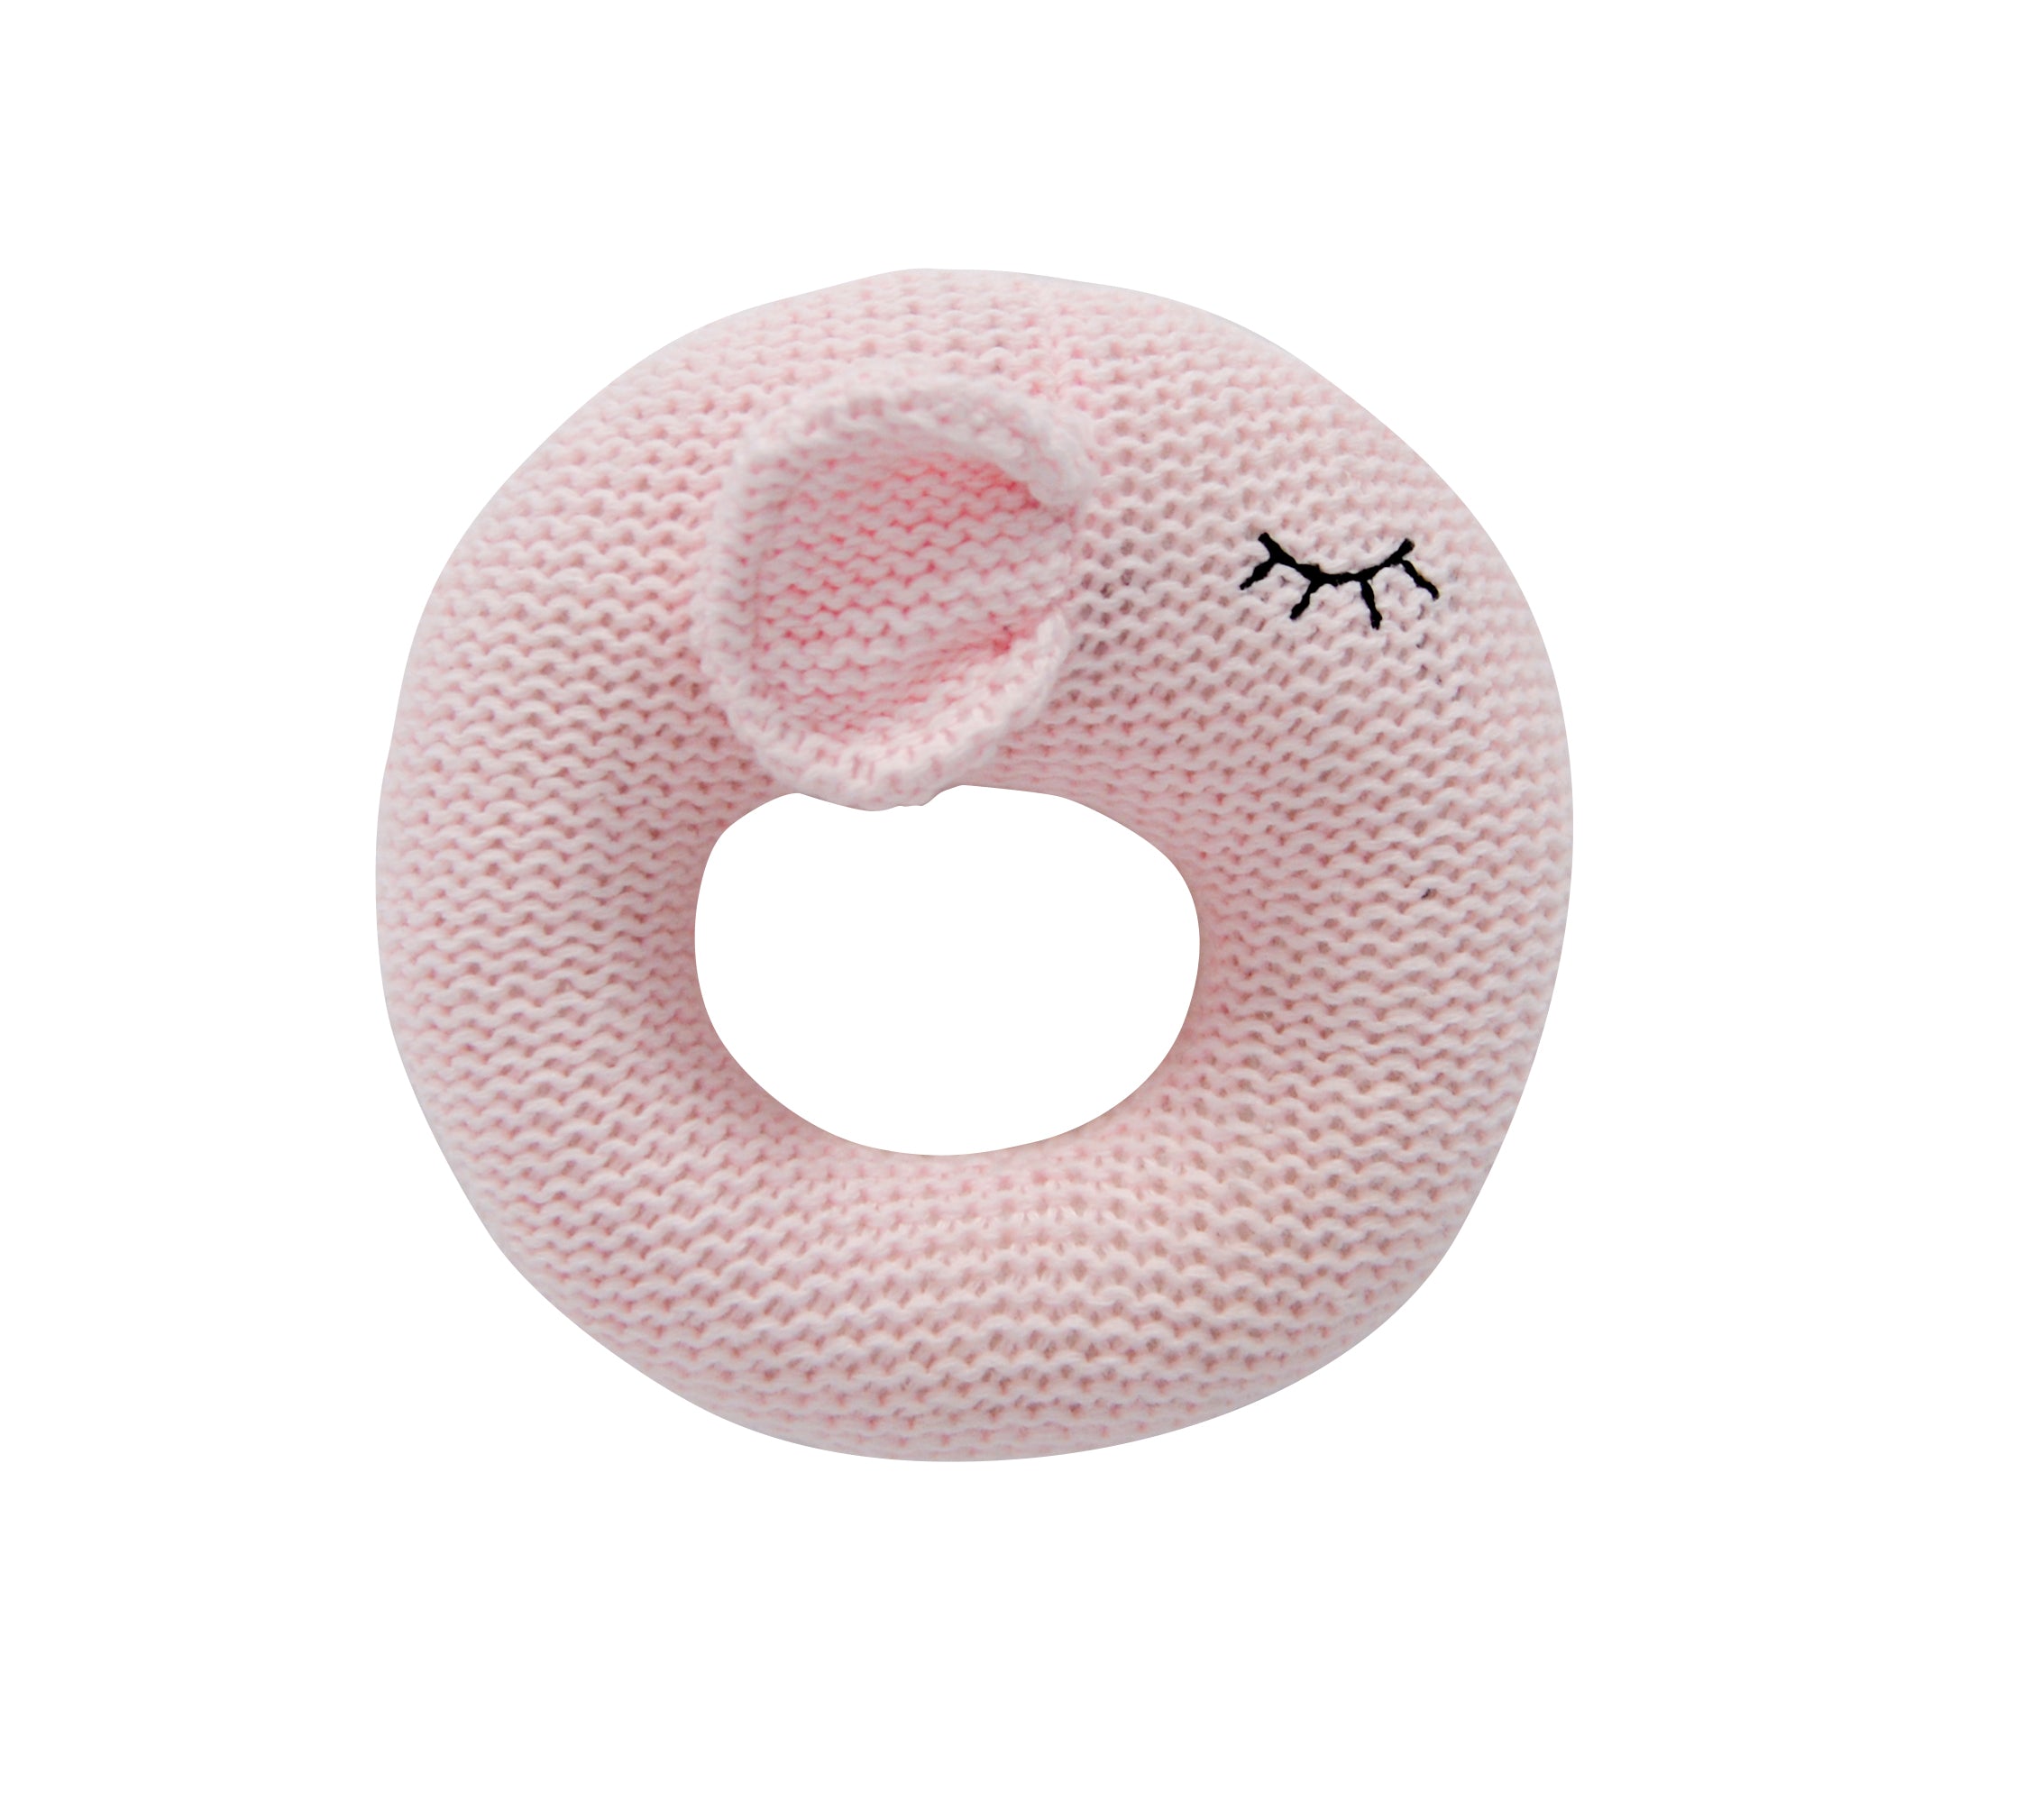 Pink baby rattle for baby boxes and hampers, Melbourne